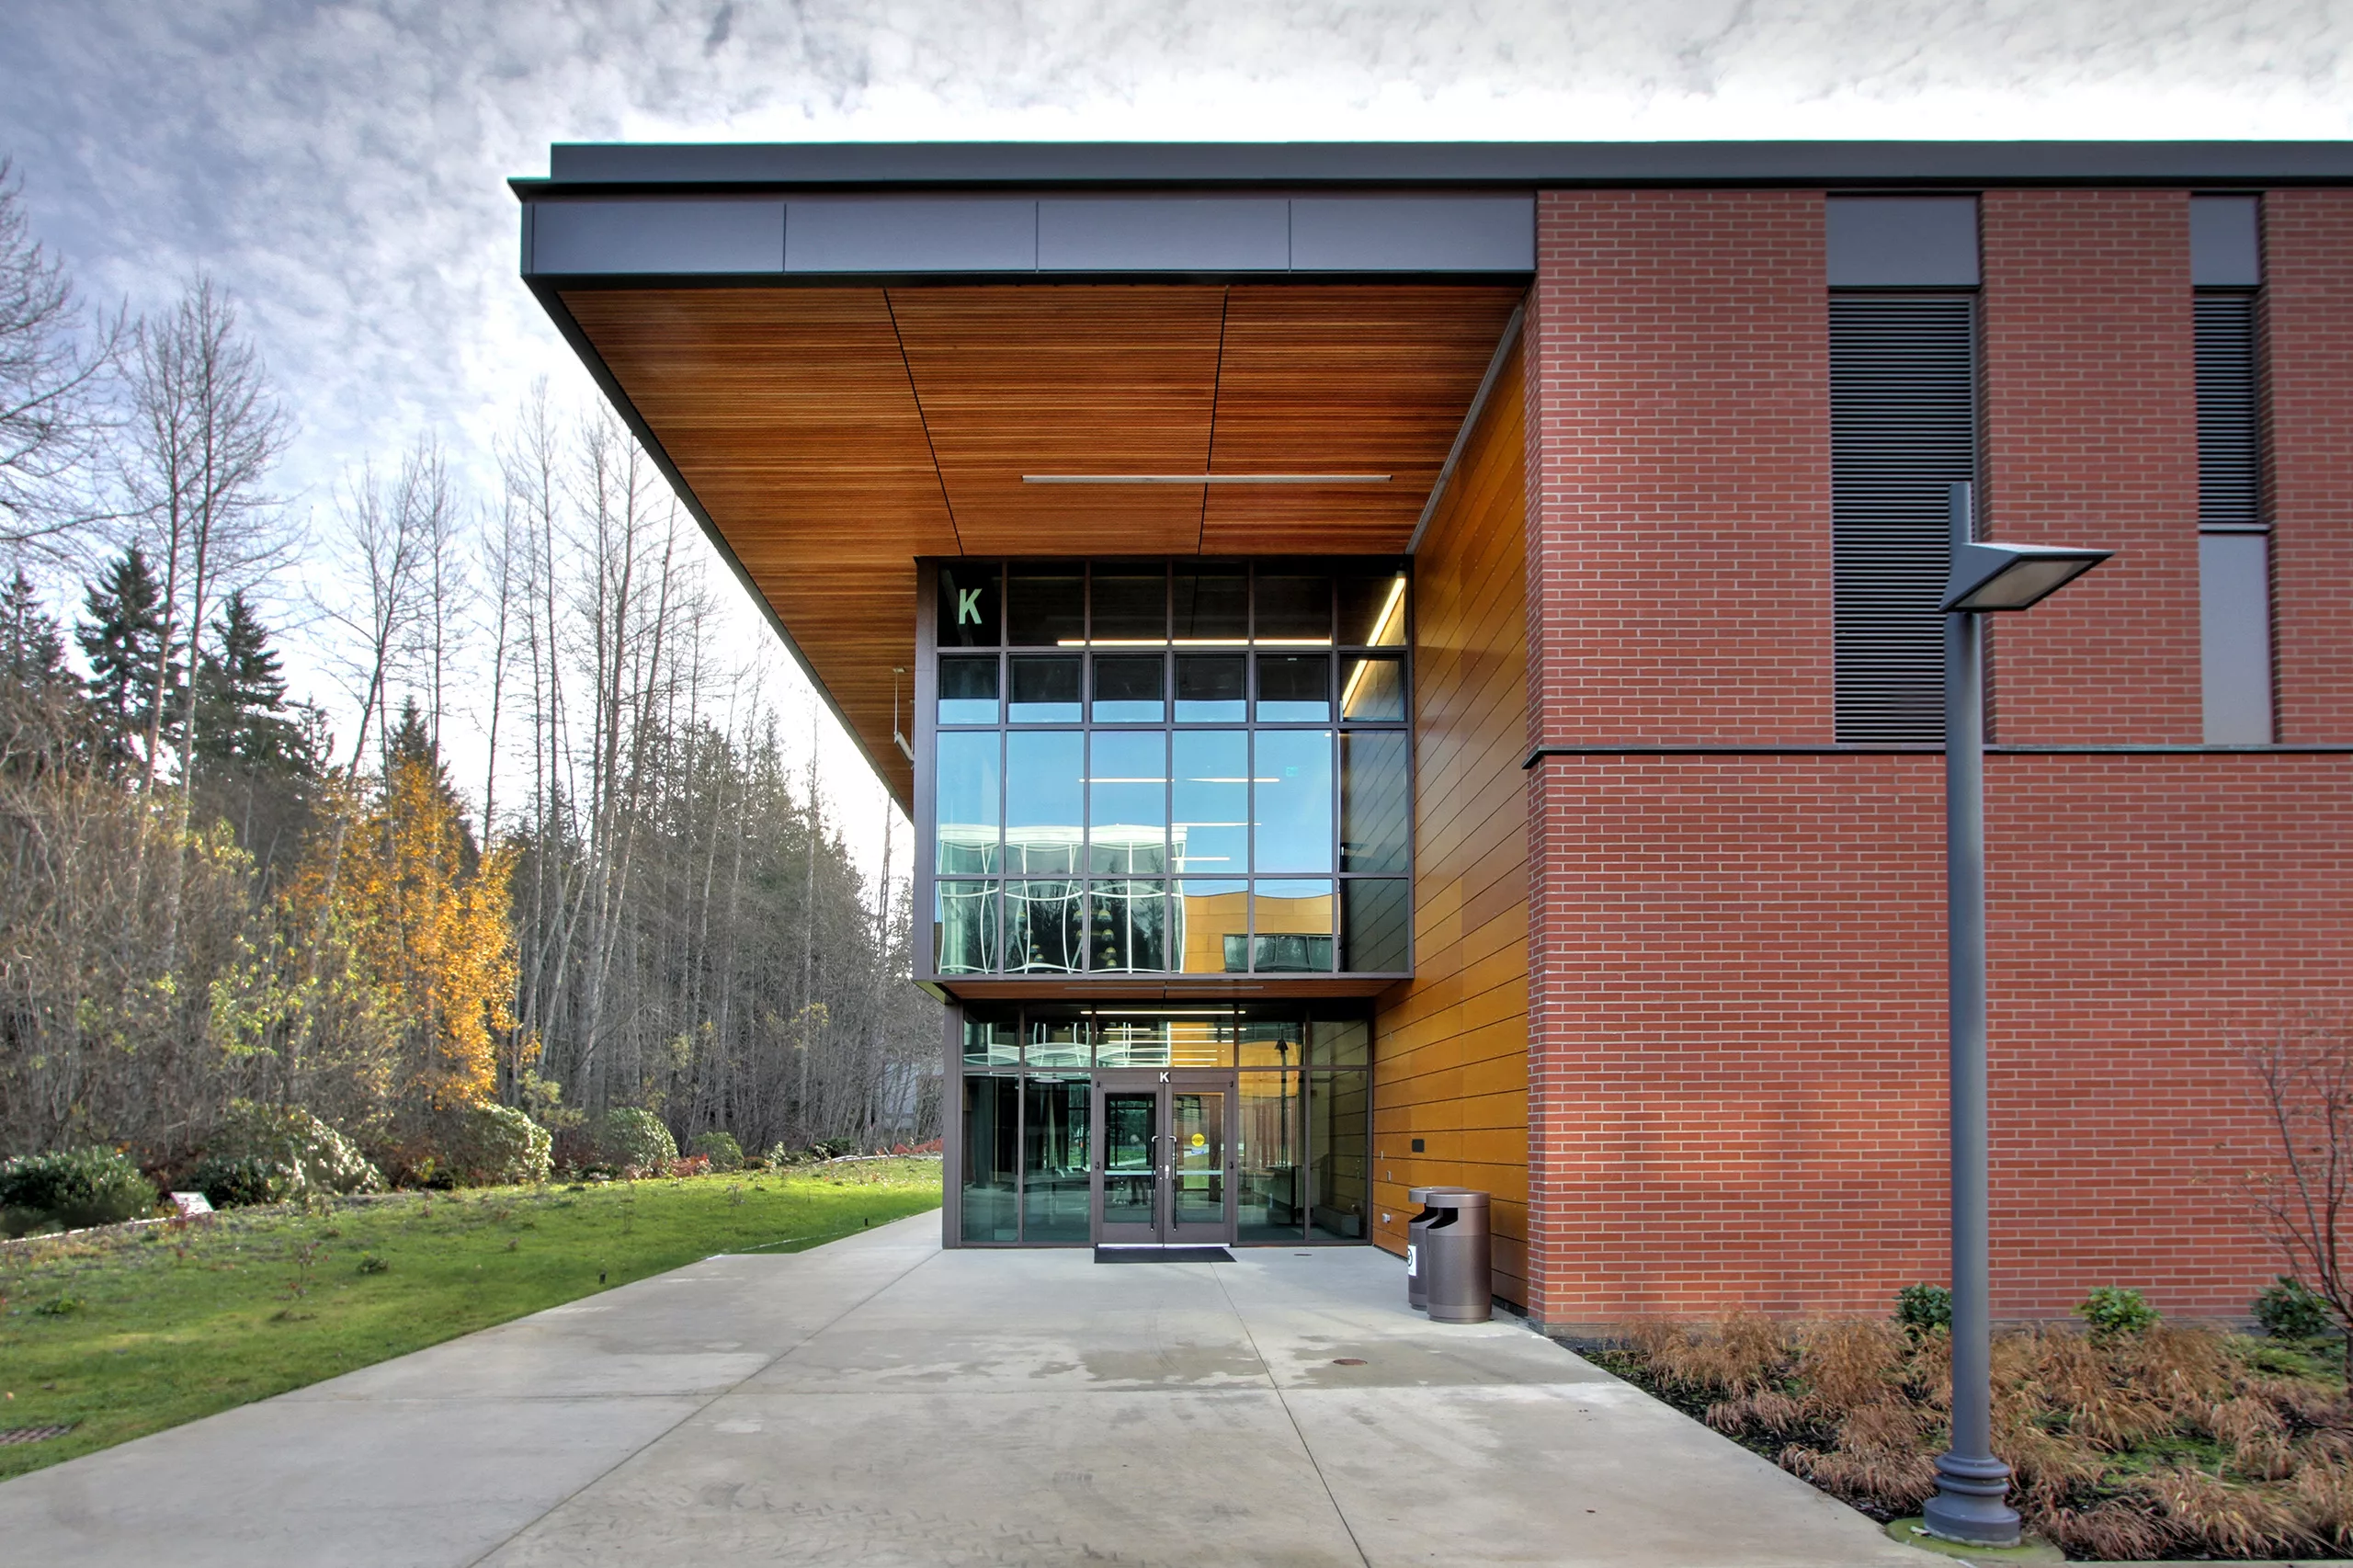 Exterior daylight view of the entrance to Peninsula College's Allied Health and Early Childhood Education Building with a pedestrian walkway, lamp post, and surrounding natural landscape